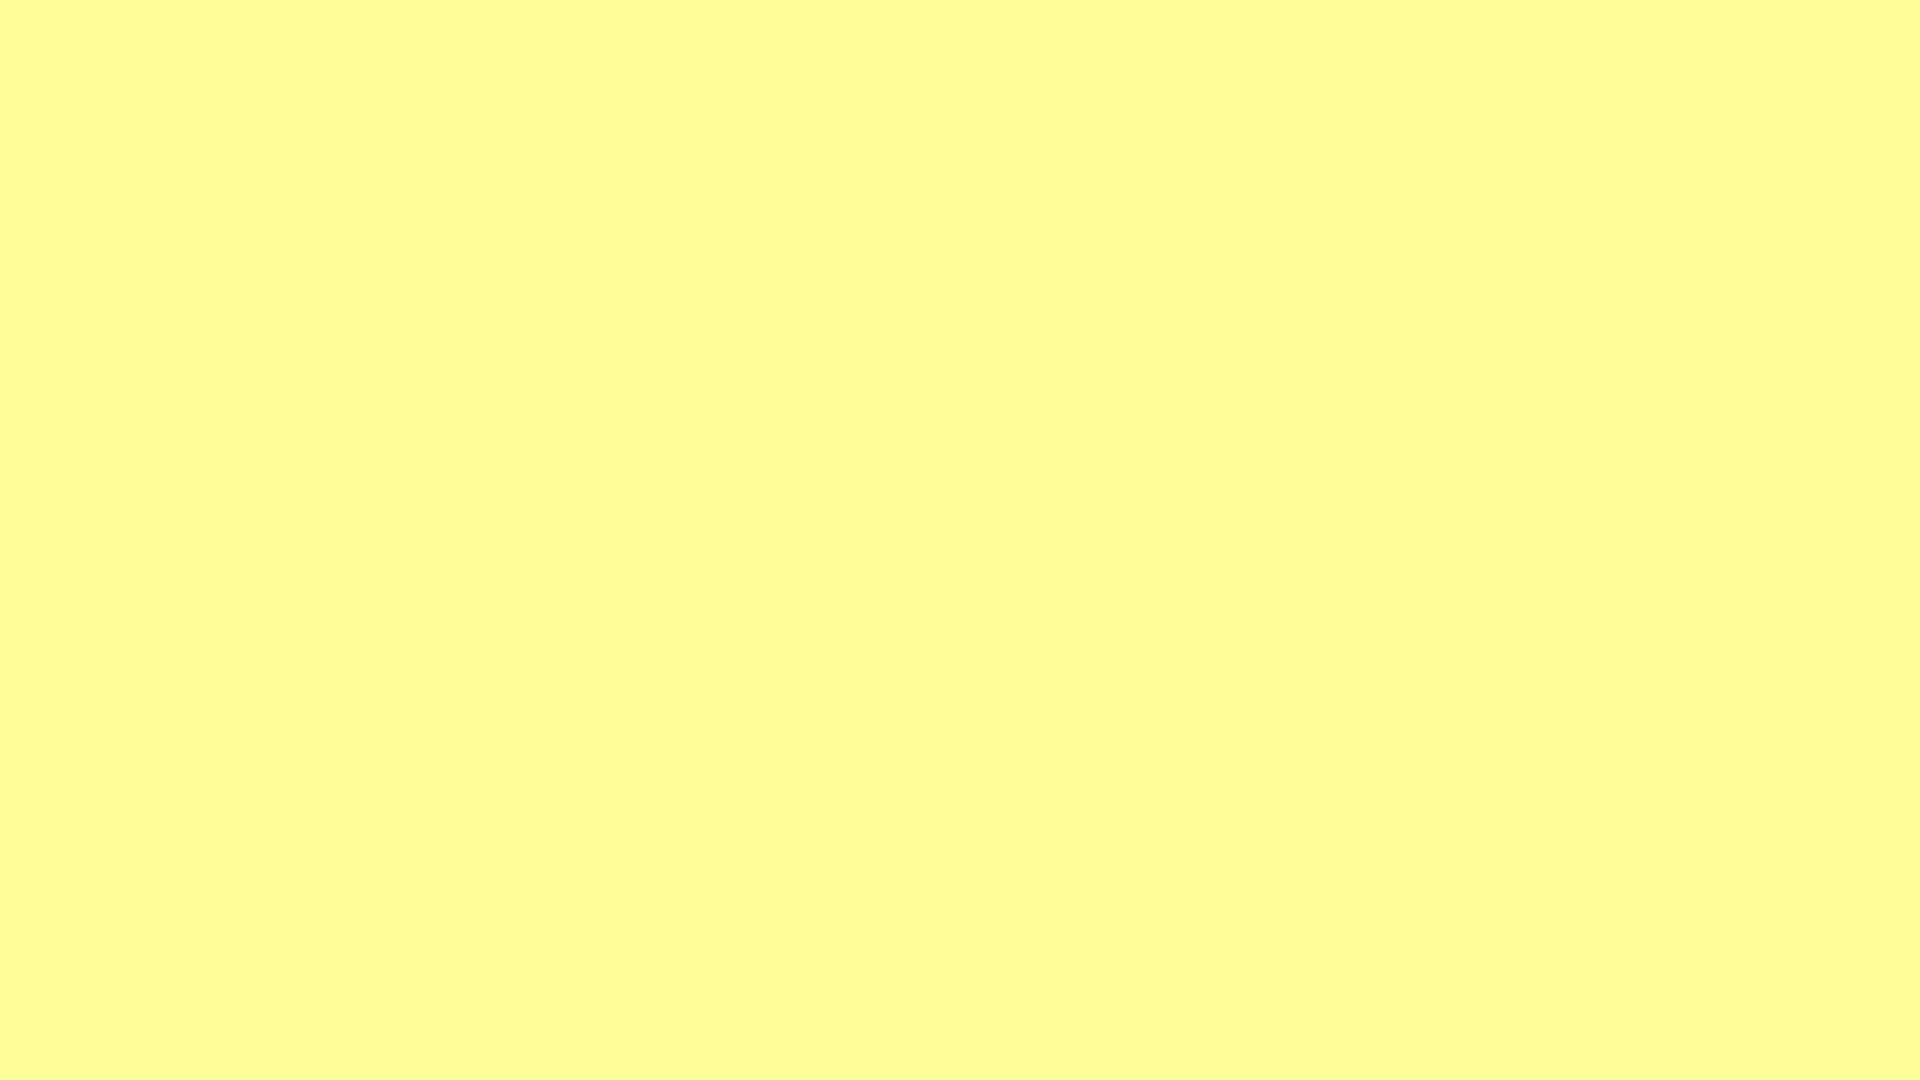 1920x1080 Pastel Yellow Solid Color Background